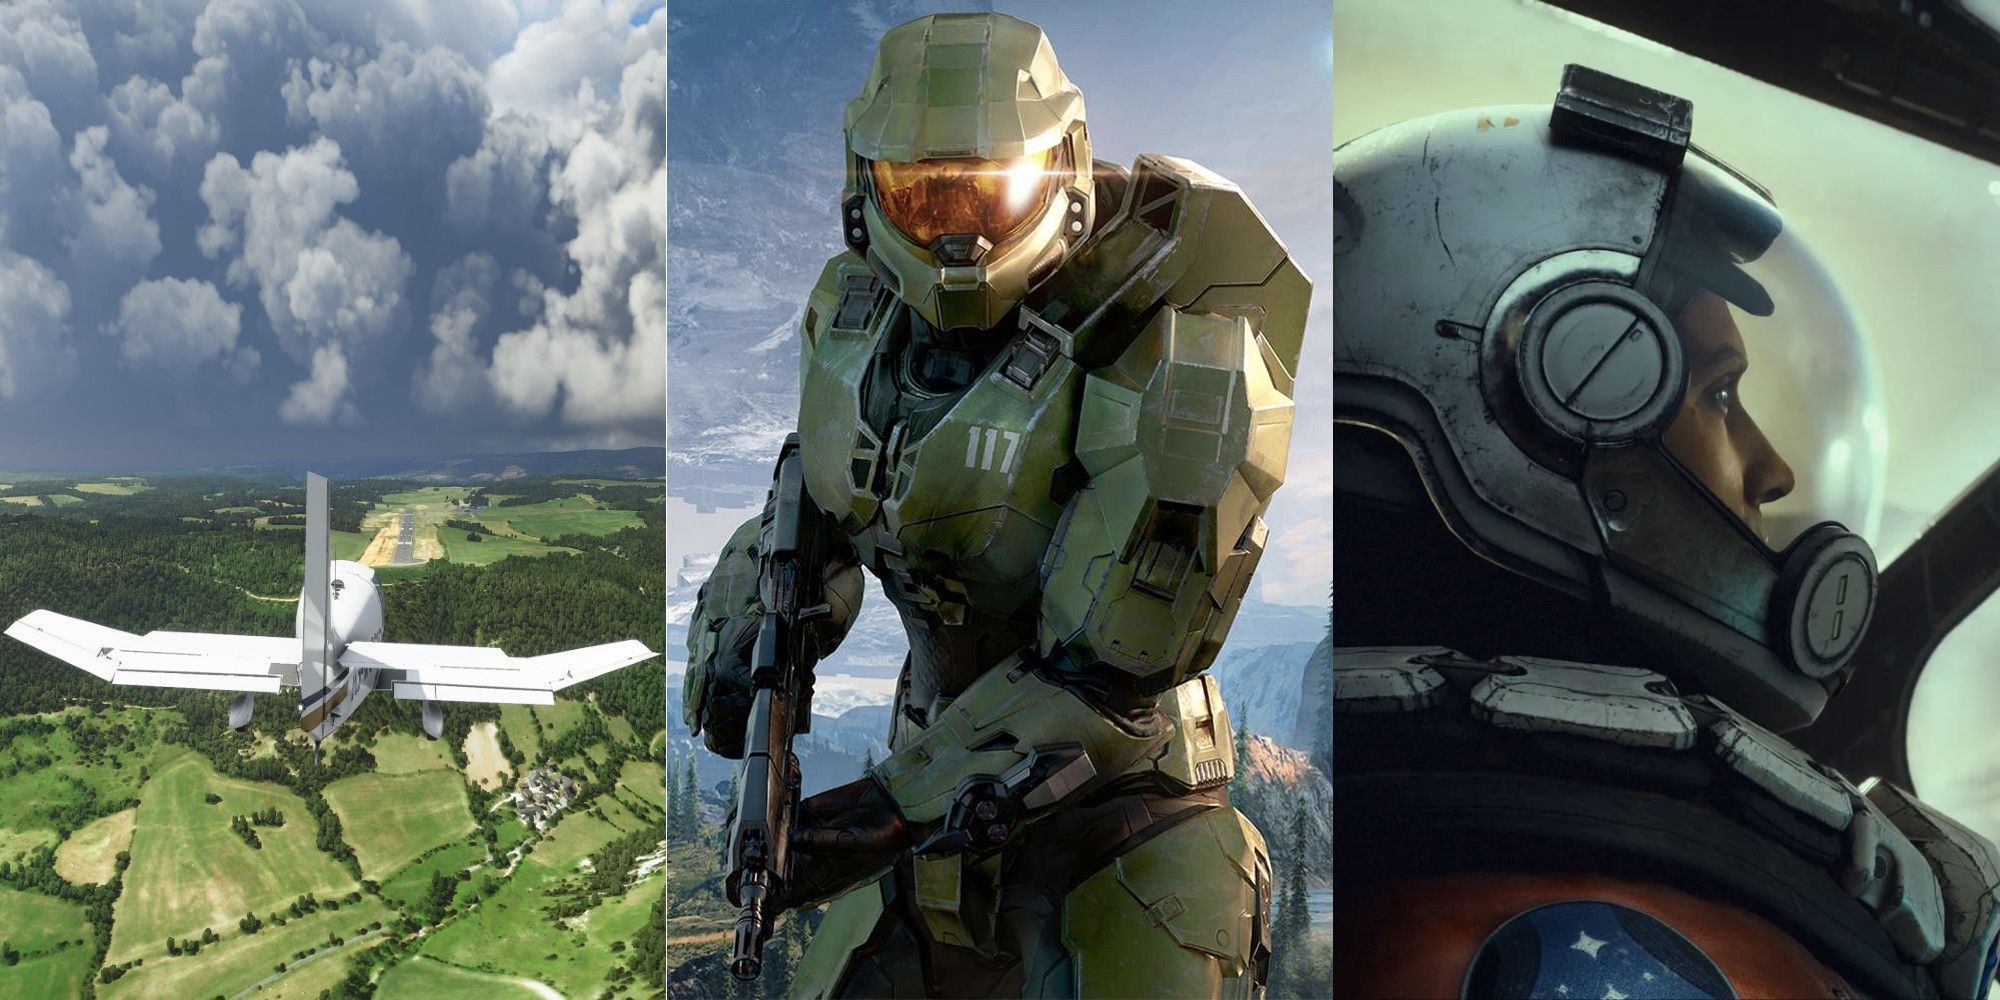 Xbox Series X has already received big hits like Microsoft Flight Simulator and Halo Infinite, and will get games like Starfield next year.